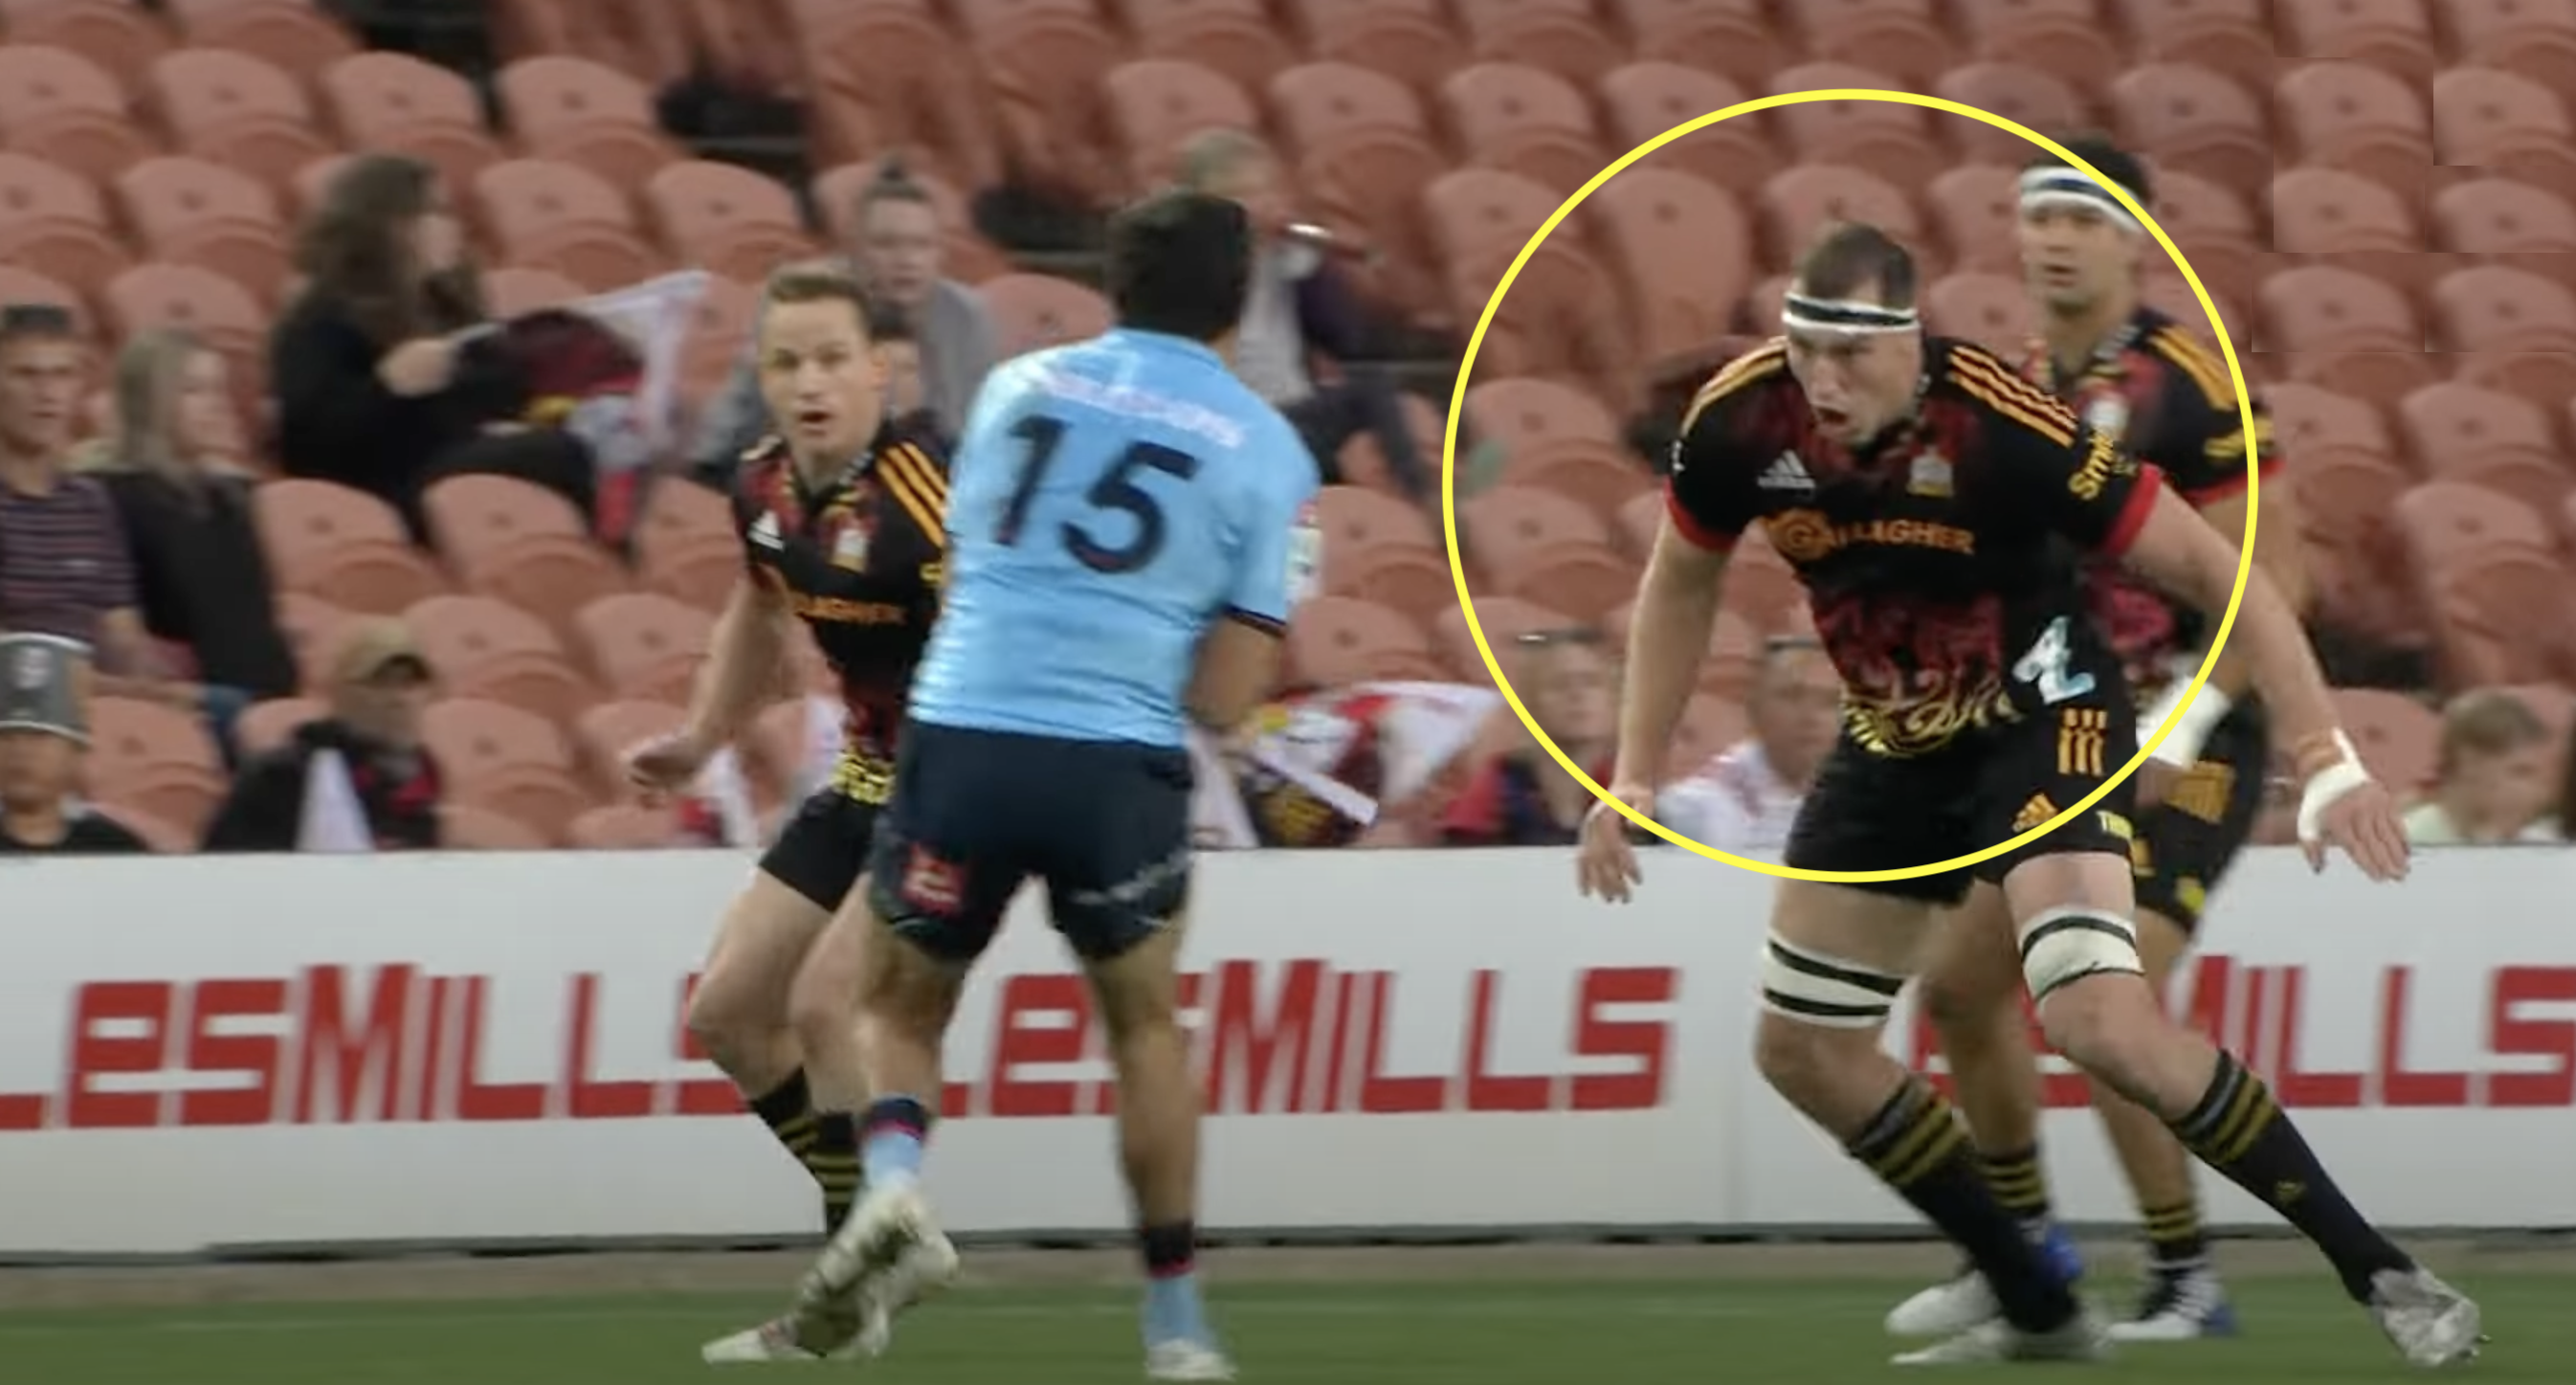 Brodie Retallick cuts fullback in half with textbook legal tackle